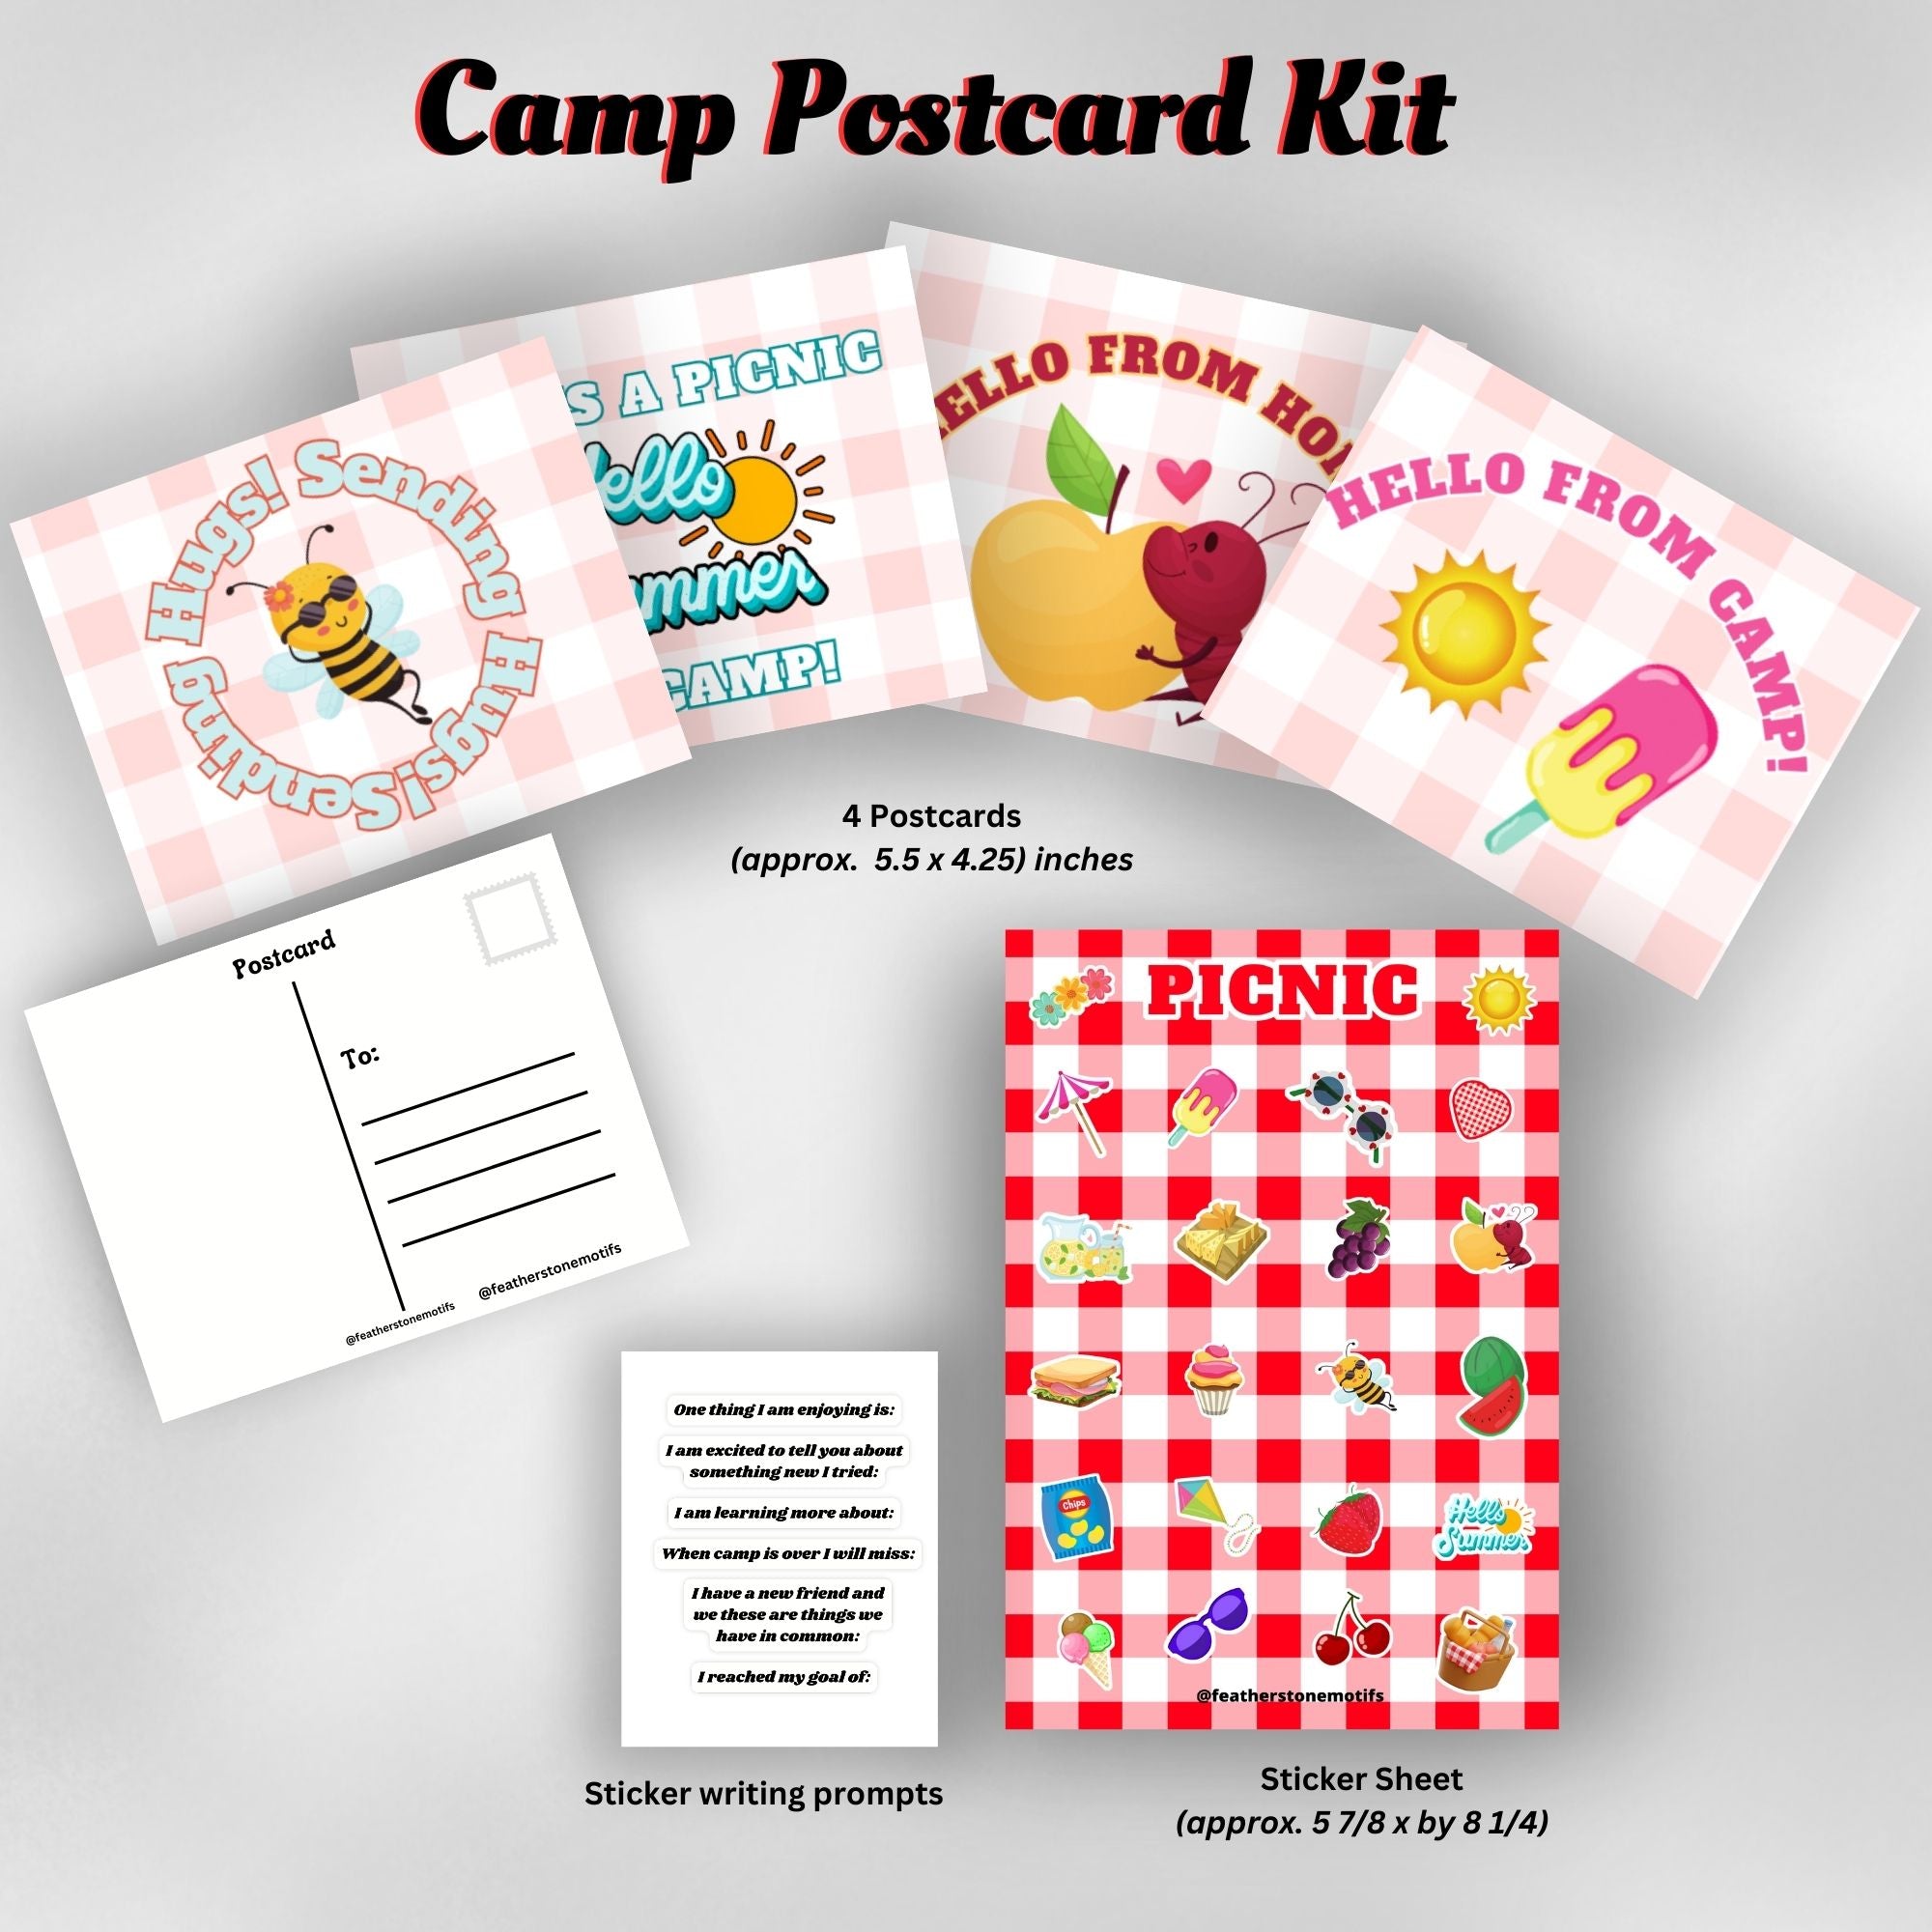 This image shows the Picnic themed Camp Postcard Kit with dimensions and descriptions for each item.